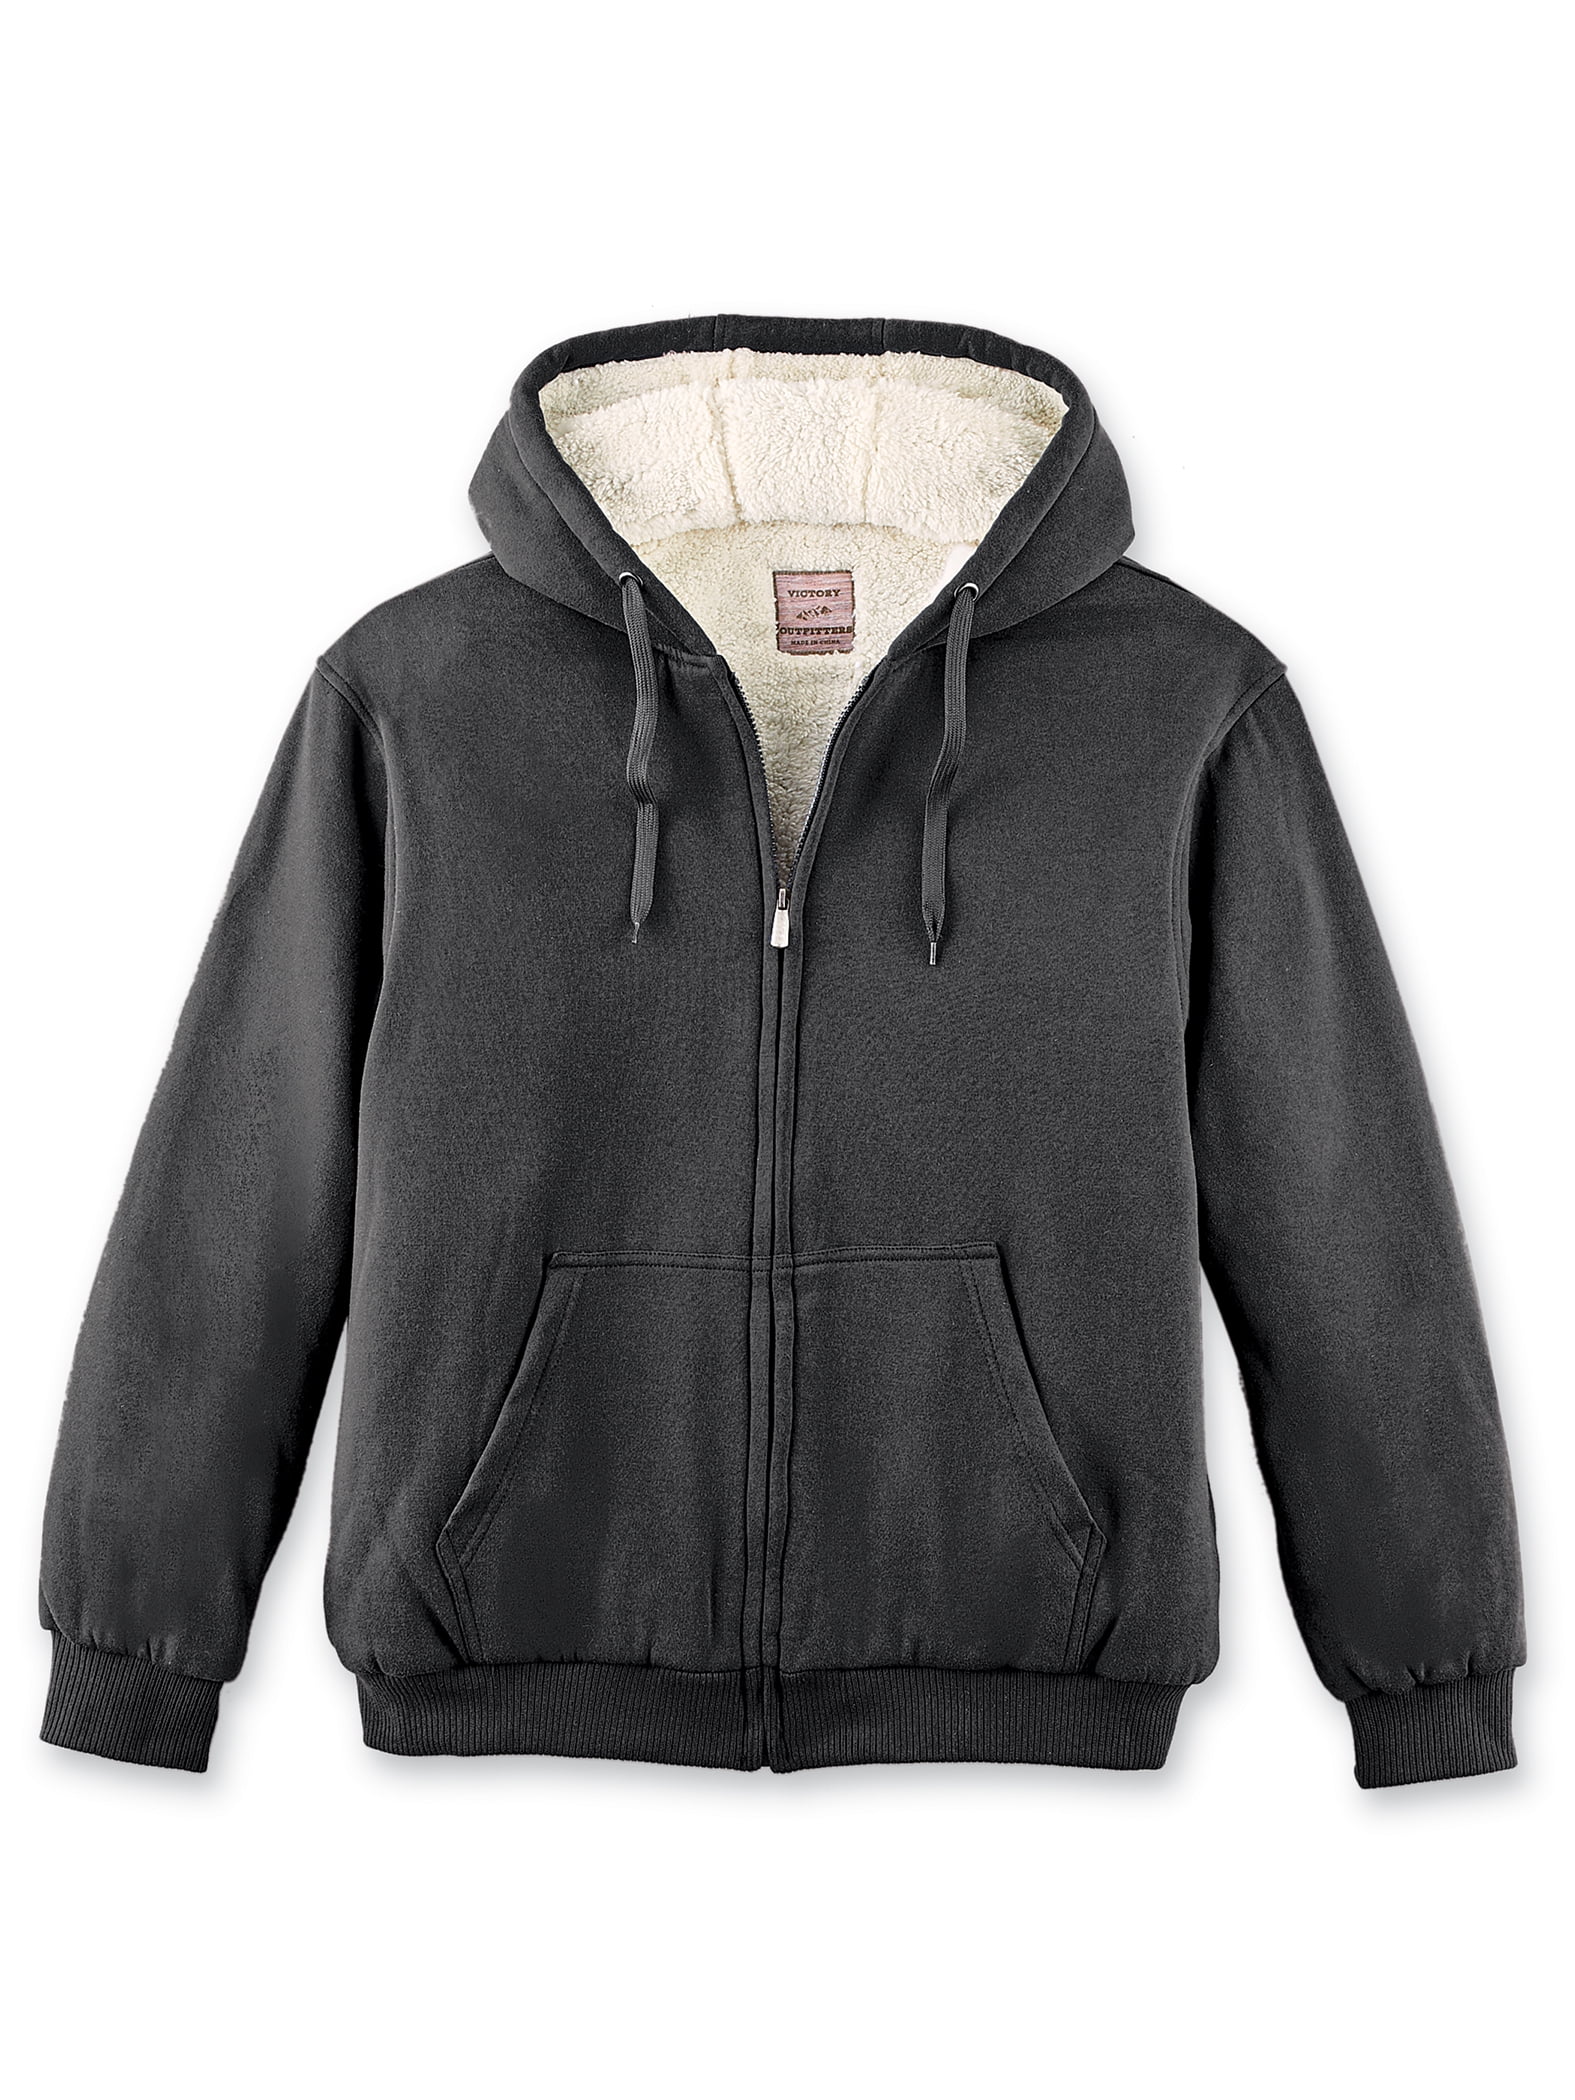 Victory Outfitters Men's Fleece Zip Up Hoodie with Soft Berber Lining ...